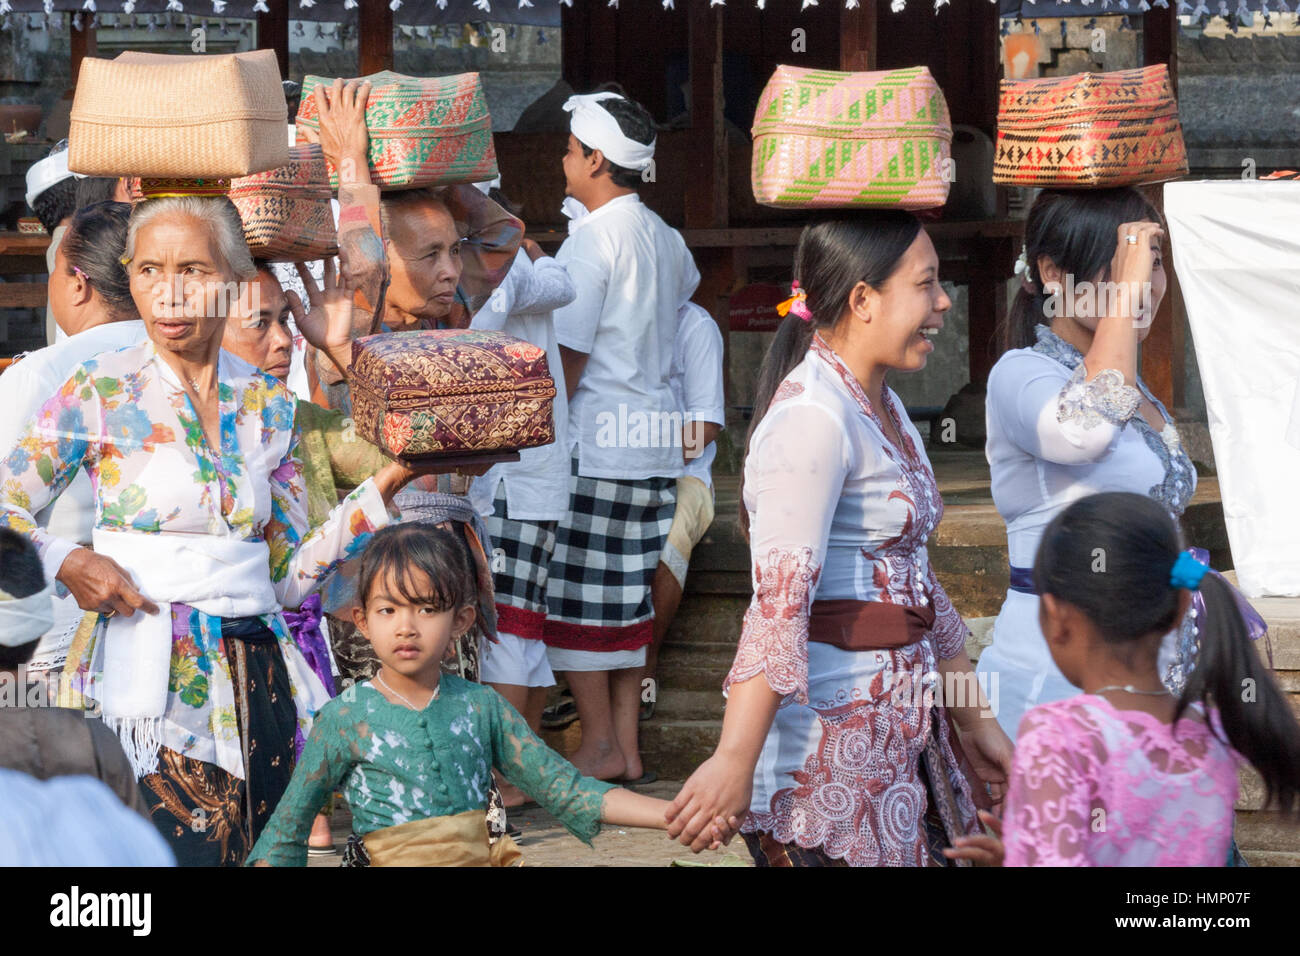 Women with baskets of offerings and children at the temple during the Galungan festival in Bali, Indonesia Stock Photo